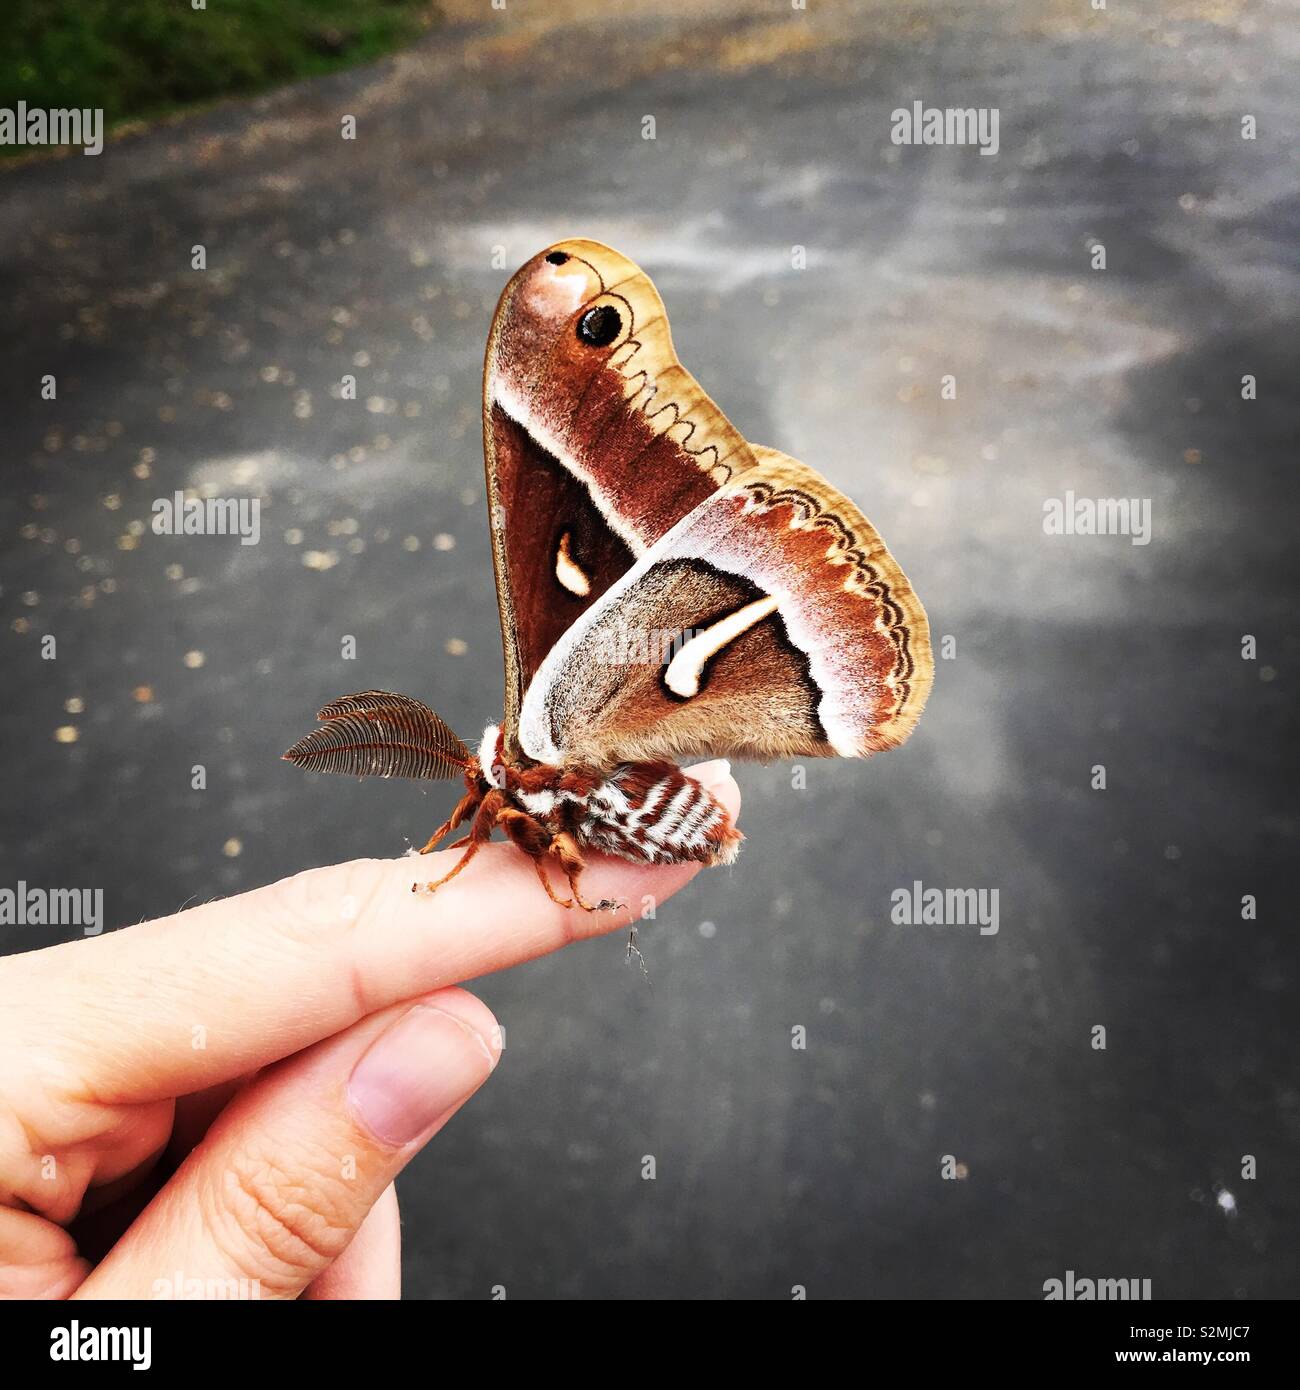 A large moth resting on a woman’s finger. Stock Photo